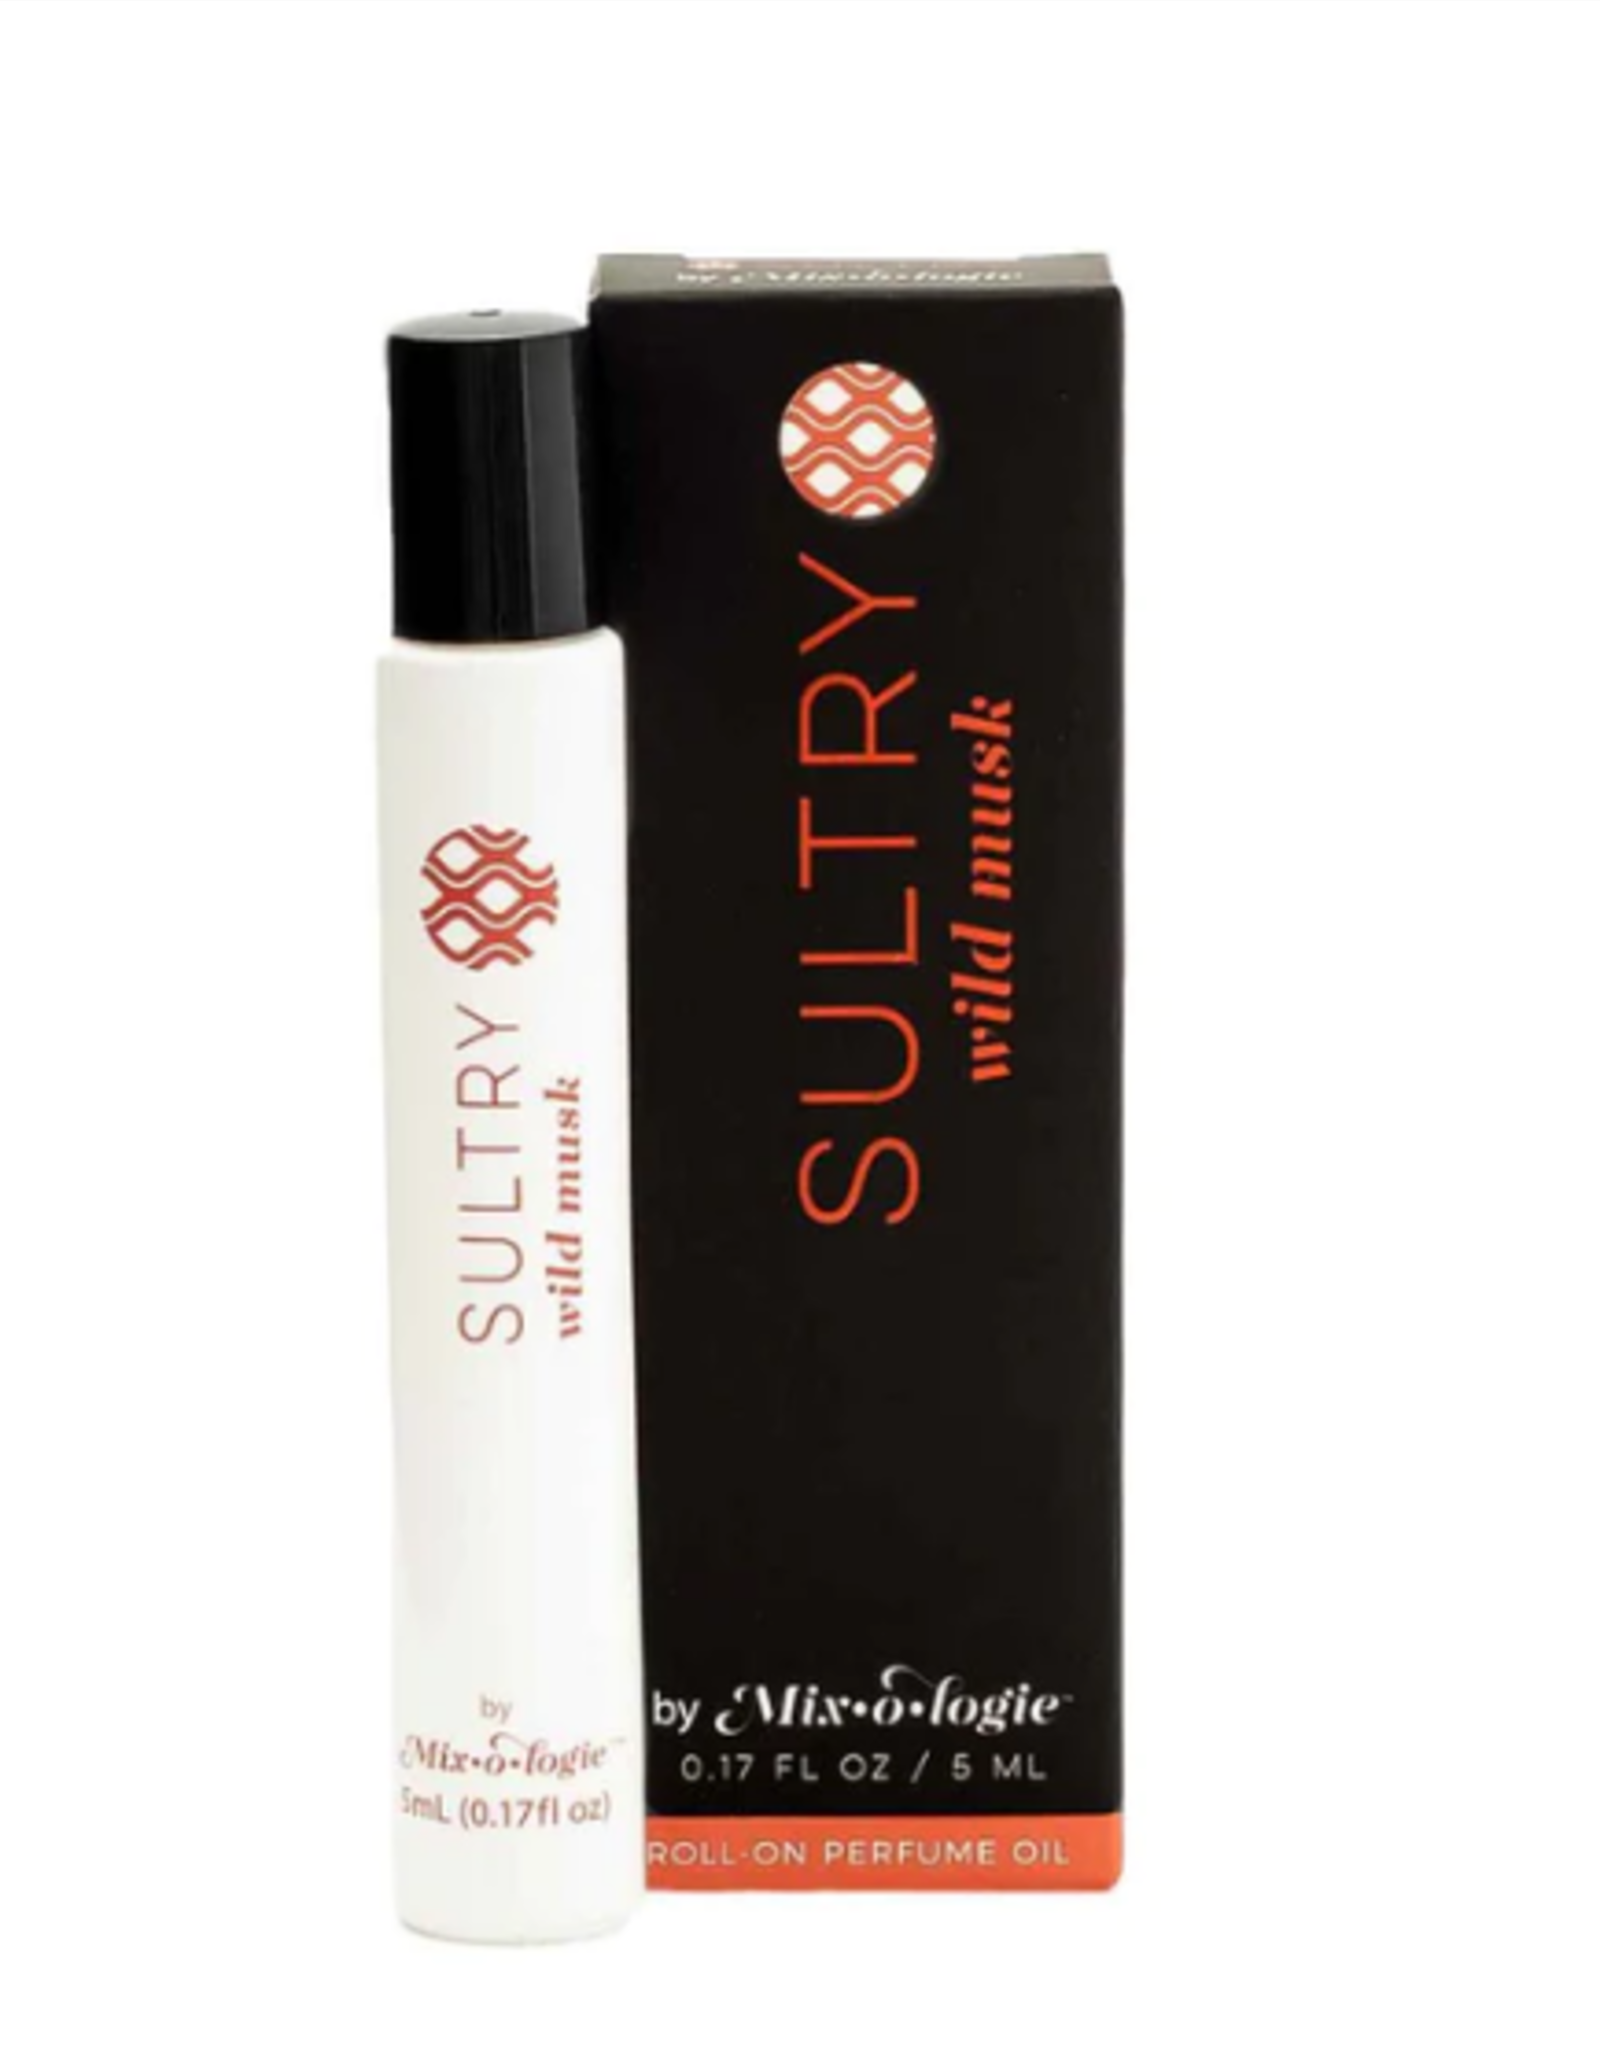 Mixologie SULTRY Wild Musk Roll-On Perfume Oil